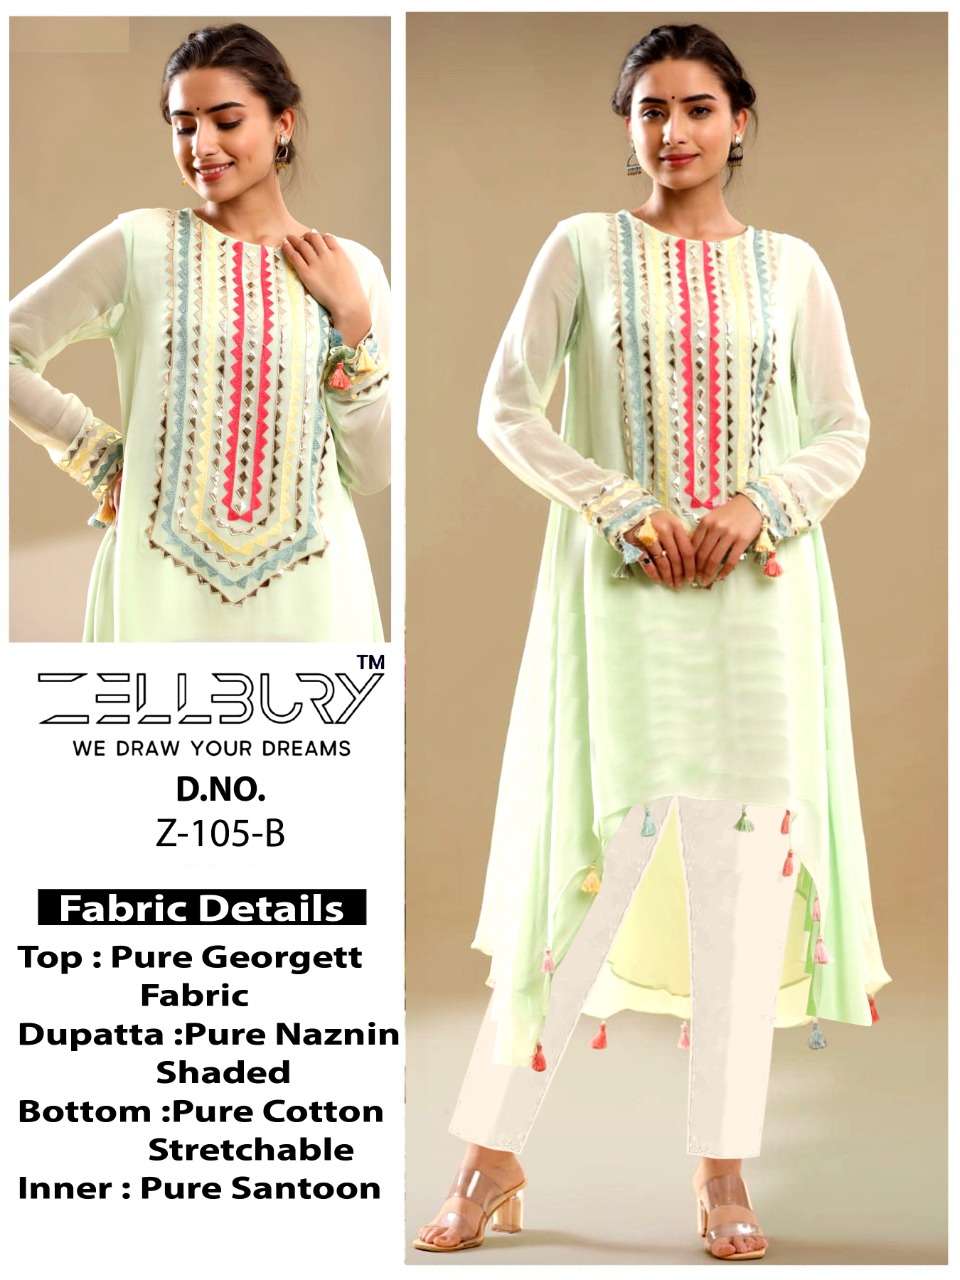 CELLBURY 105 COLOURS BY CELLBURY 105-A TO 105-E SERIES BEAUTIFUL PAKISTANI SUITS STYLISH COLORFUL FANCY CASUAL WEAR & ETHNIC WEAR PURE GEORGETTE EMBROIDERED DRESSES AT WHOLESALE PRICE